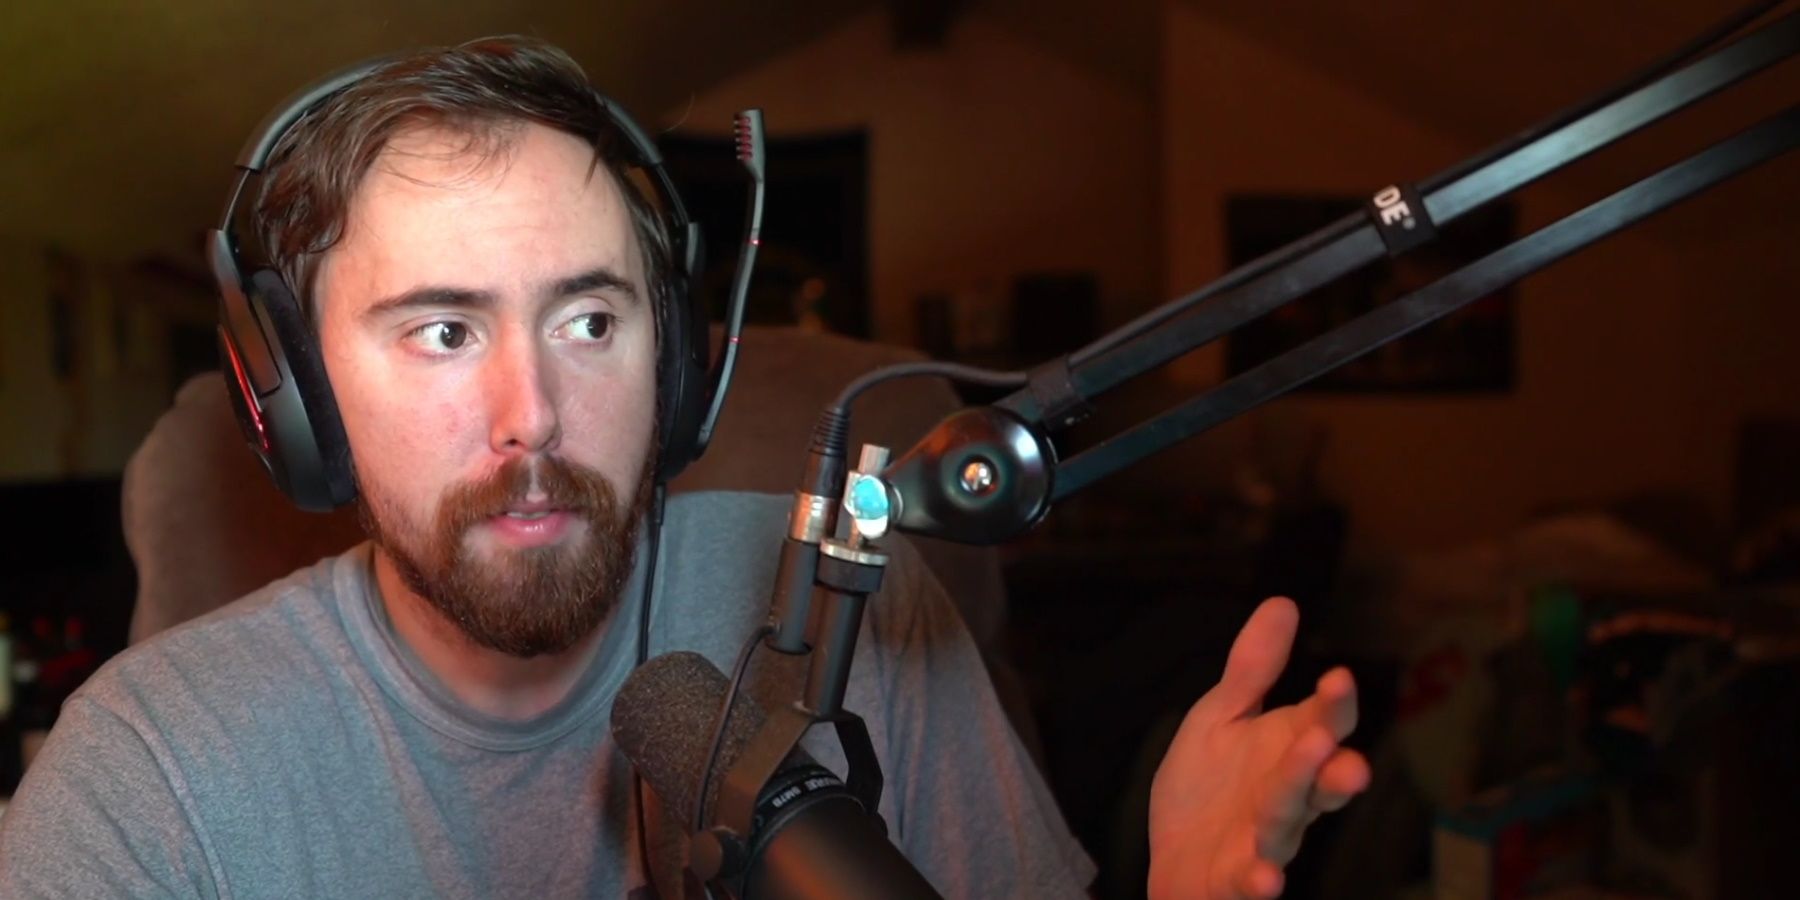 Twitch Streamer Asmongold Goes Viral for Cleaning His Room